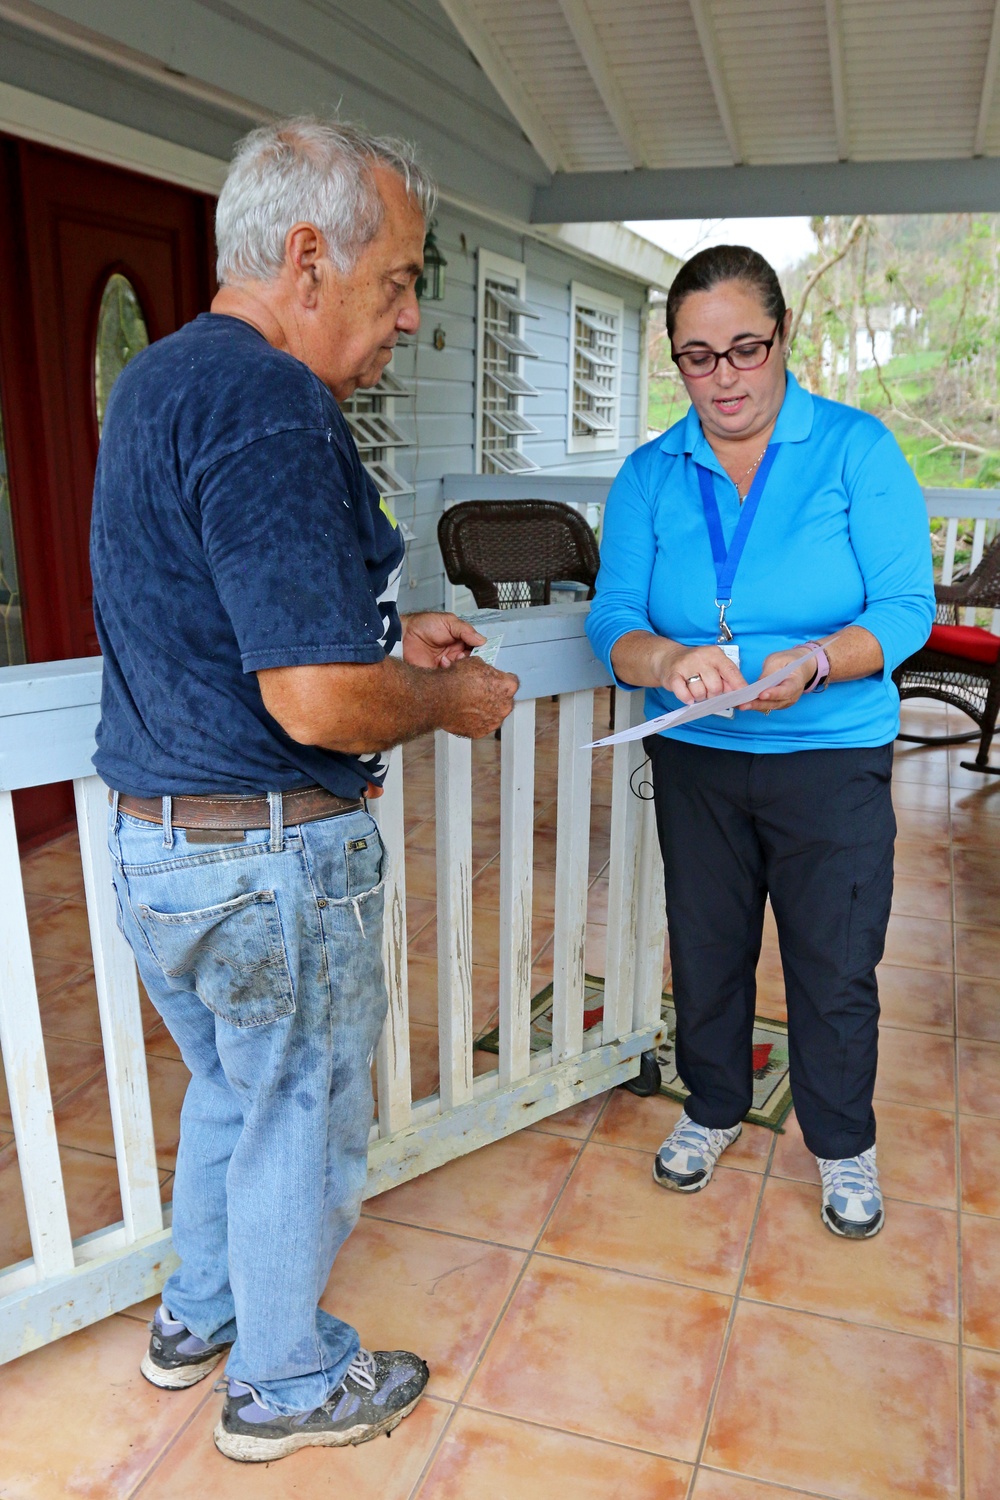 CDC provides chlorine “Aquatabs” to residents in Canovanas Puerto Rico